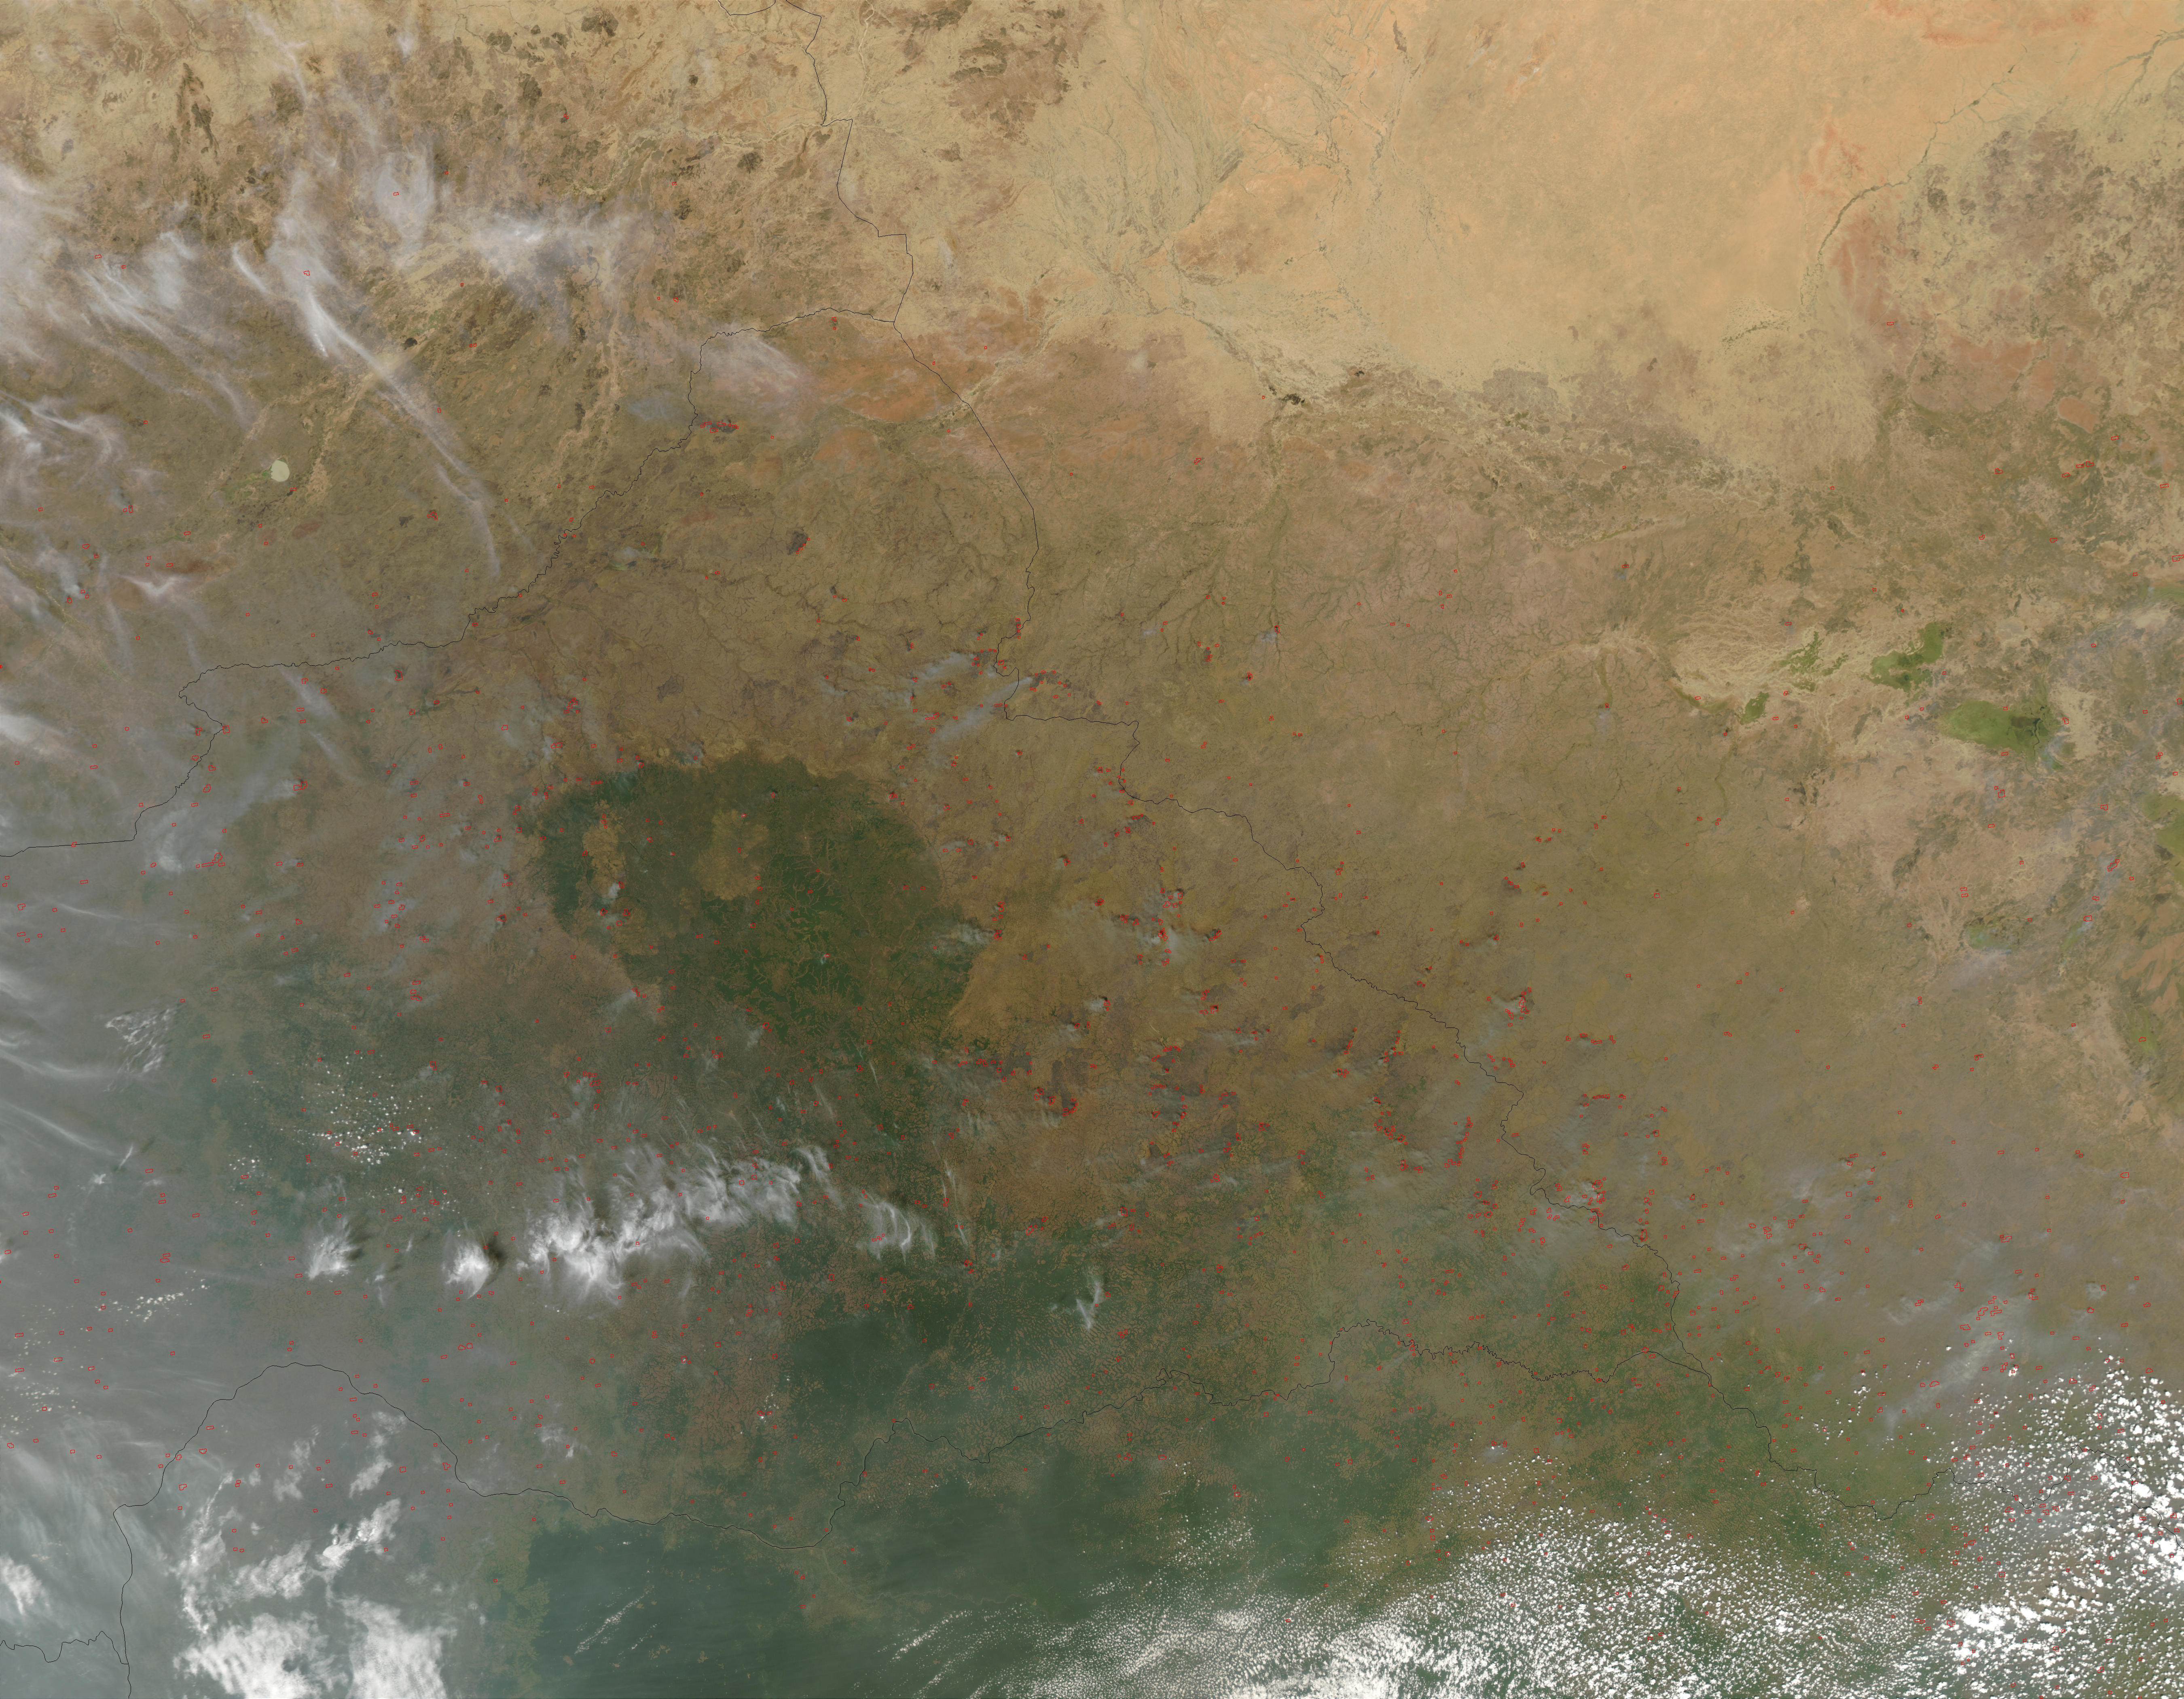 Fires in Central Africa (afternoon overpass) - related image preview